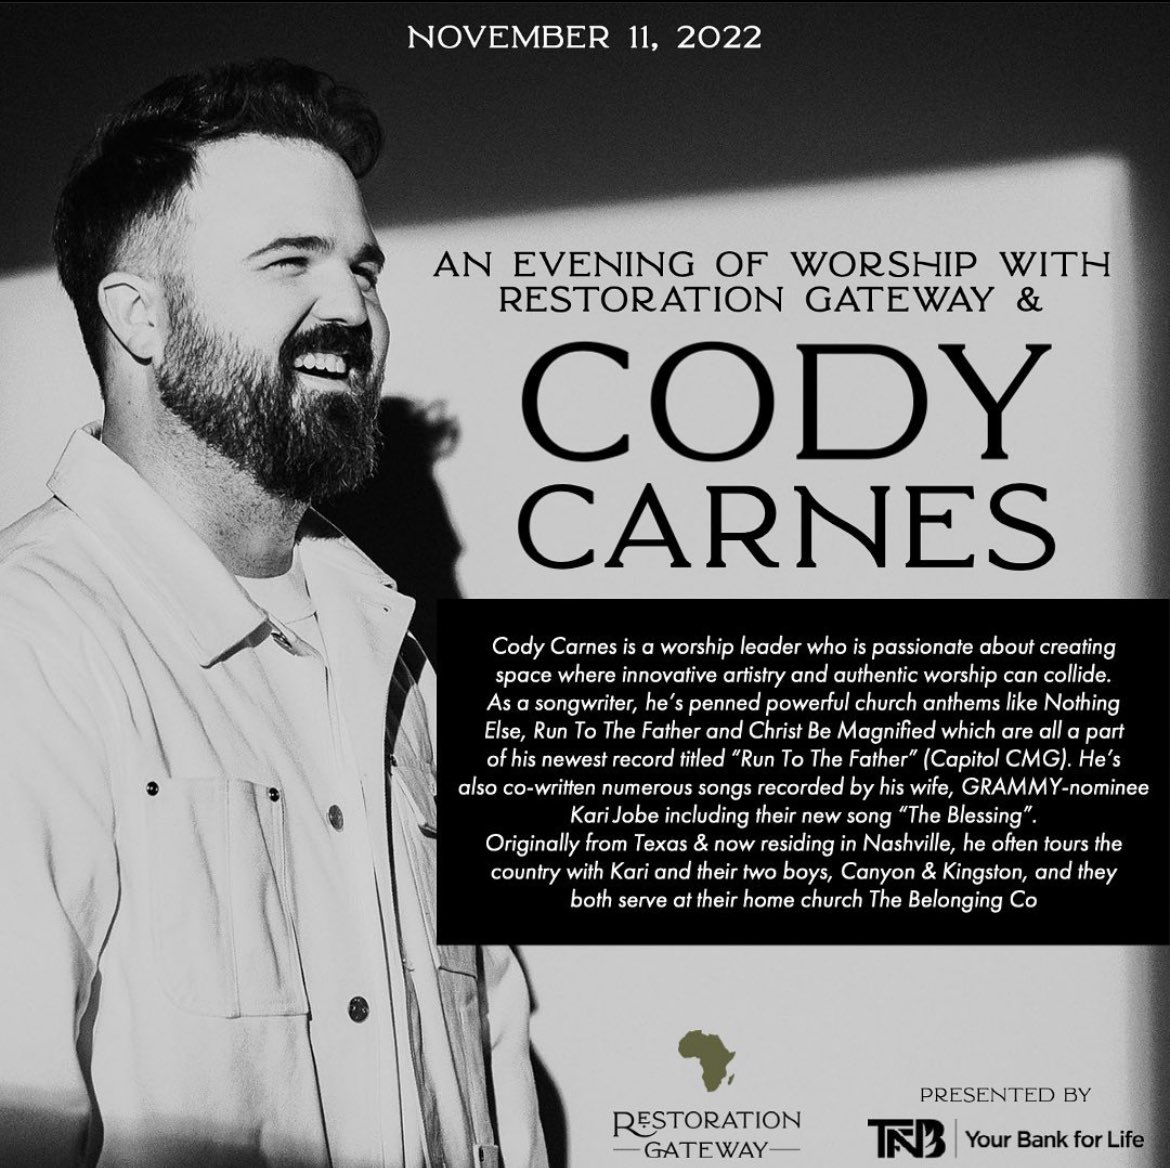 See you Friday, WACO! Tickets and more information: RG-CodyCarnes2022.eventbrite.com